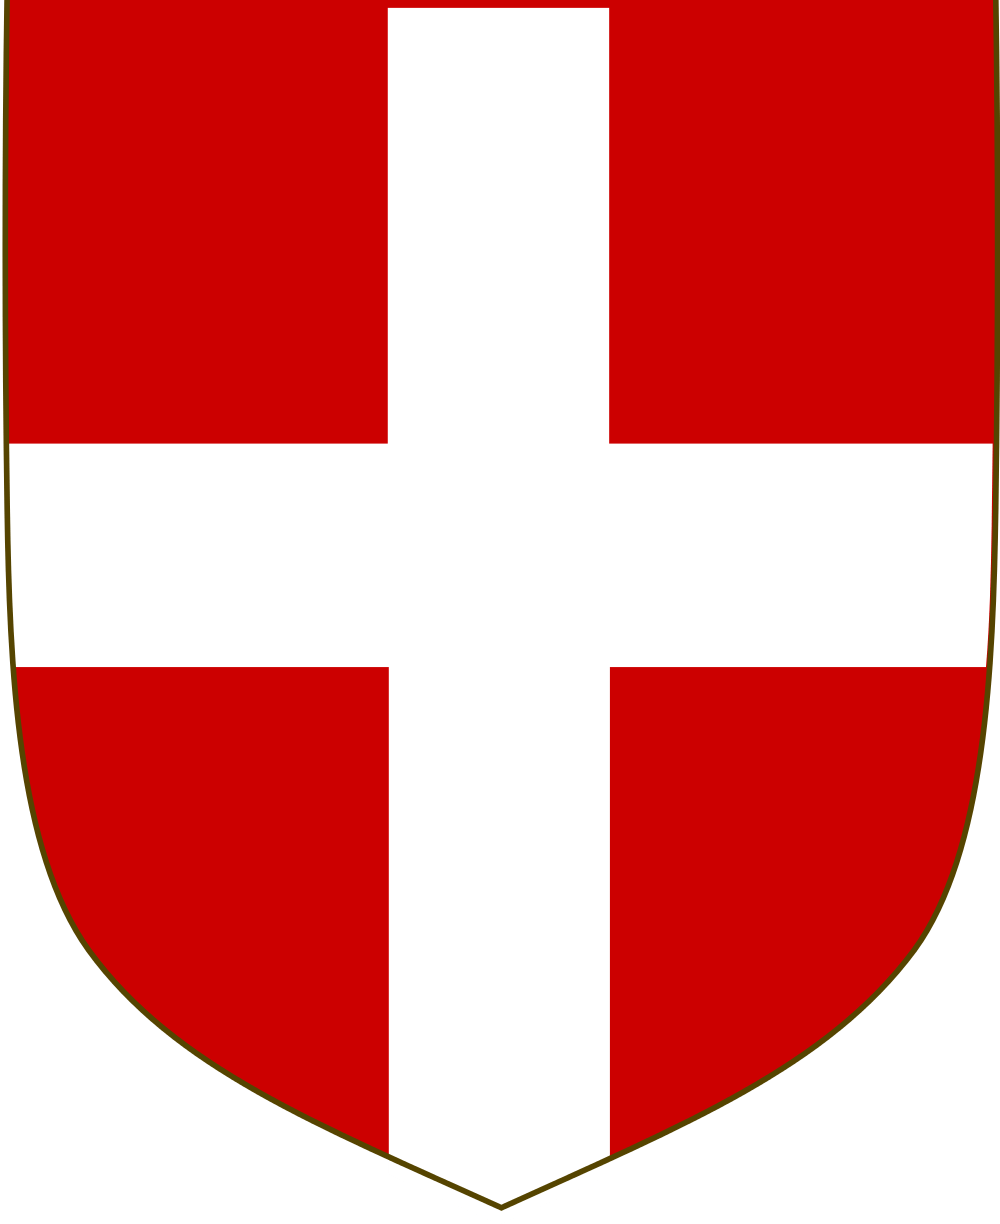 Red Cross and Shield Logo - What is your national coat of arms/national emblem? : AskEurope